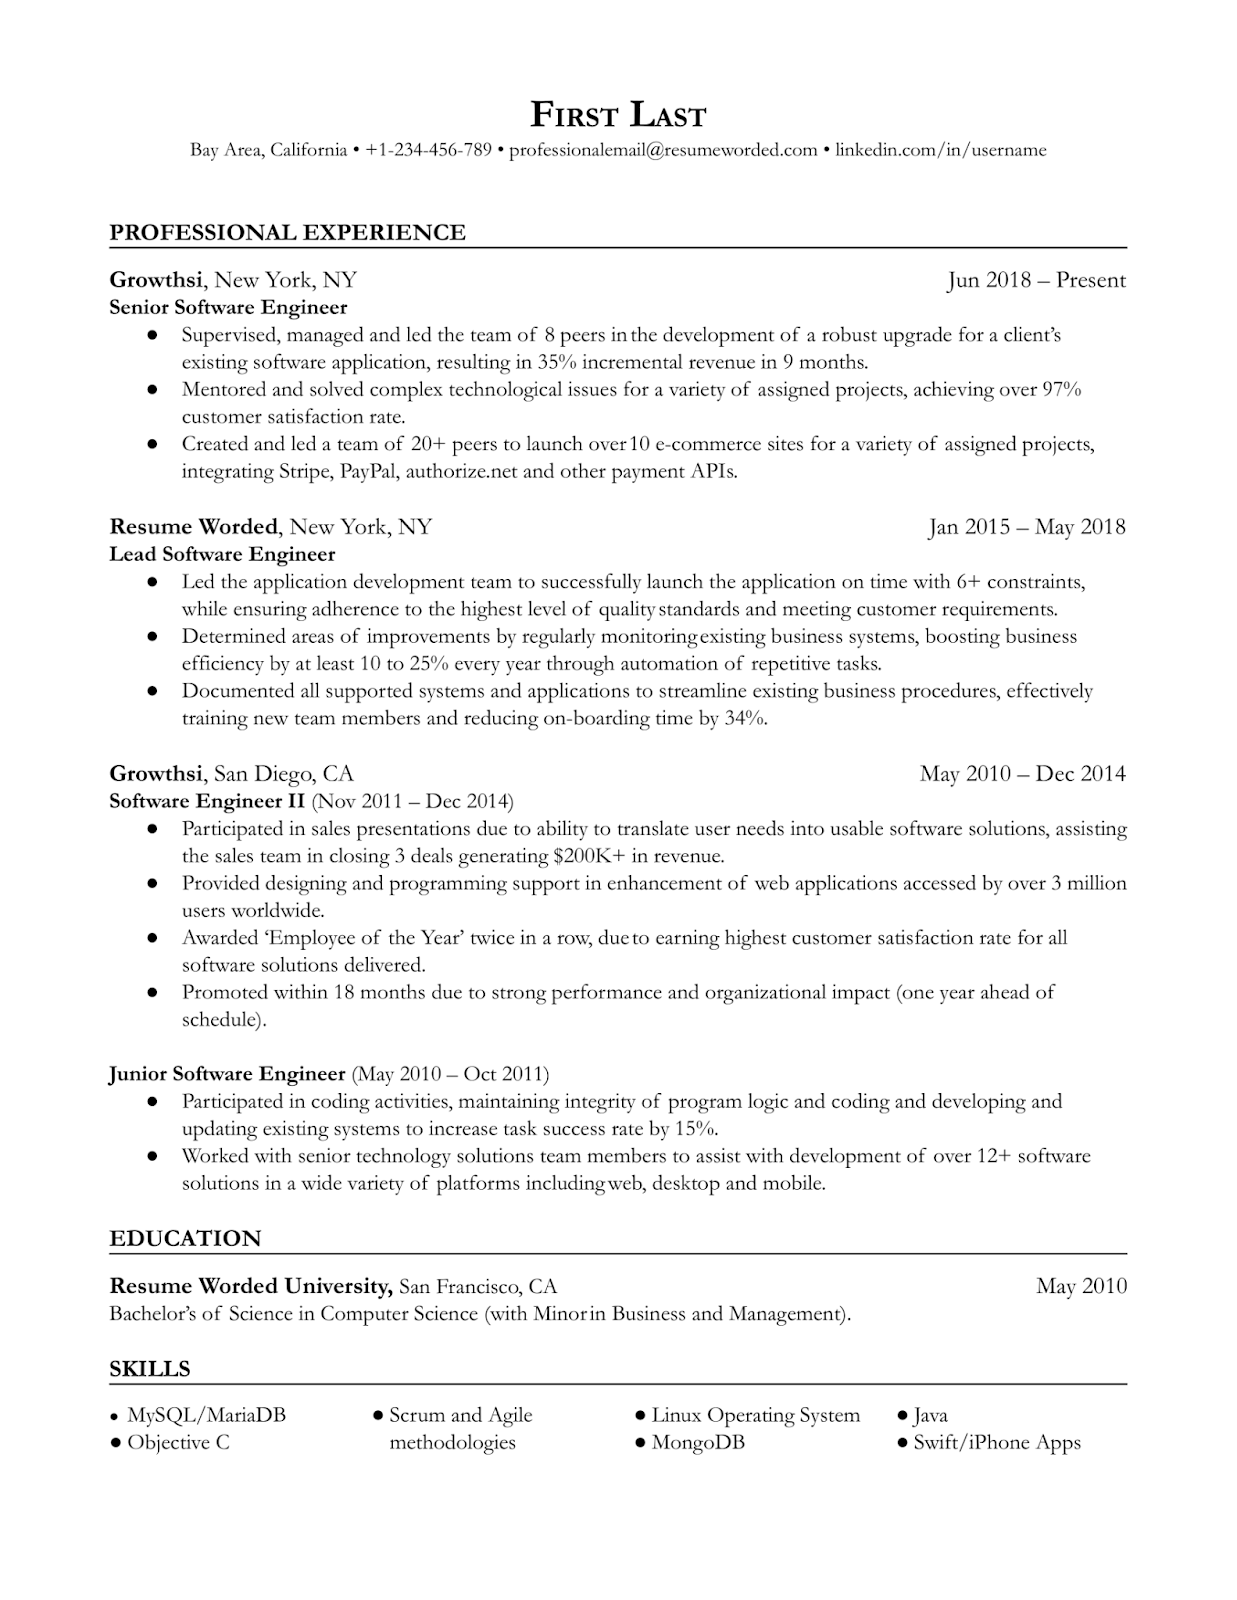 An example of a senior software engineer’s resume with a link to GitHub